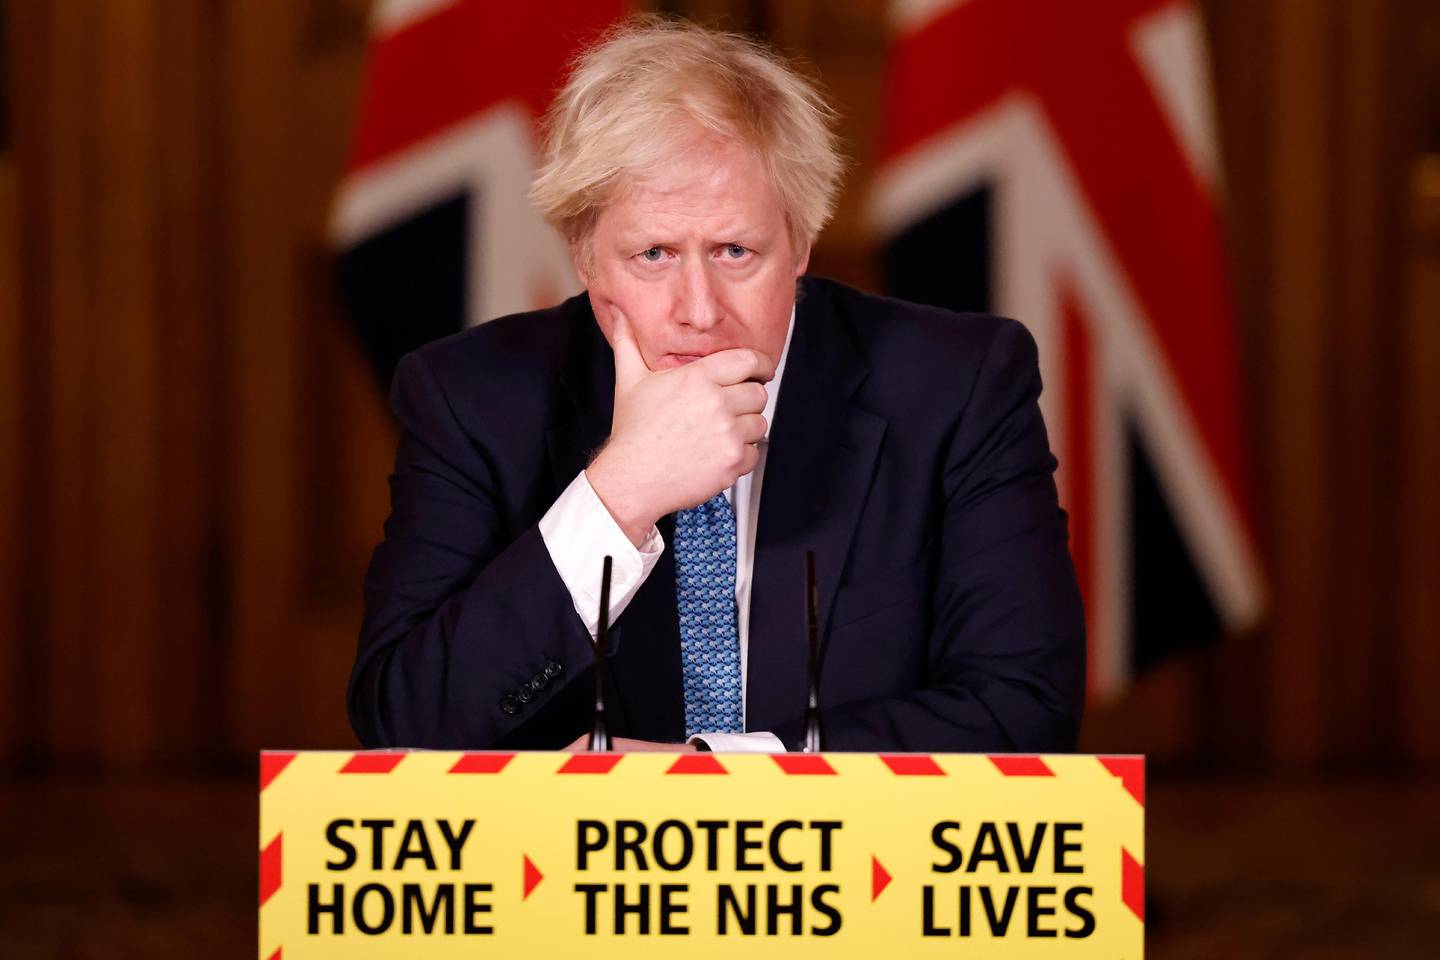 Britain's Prime Minister Boris Johnson reacts during a virtual news conference on the COVID-19 pandemic, at 10 Downing Street in London, Britain January 7, 2021. Tolga Akmen/Pool via REUTERS